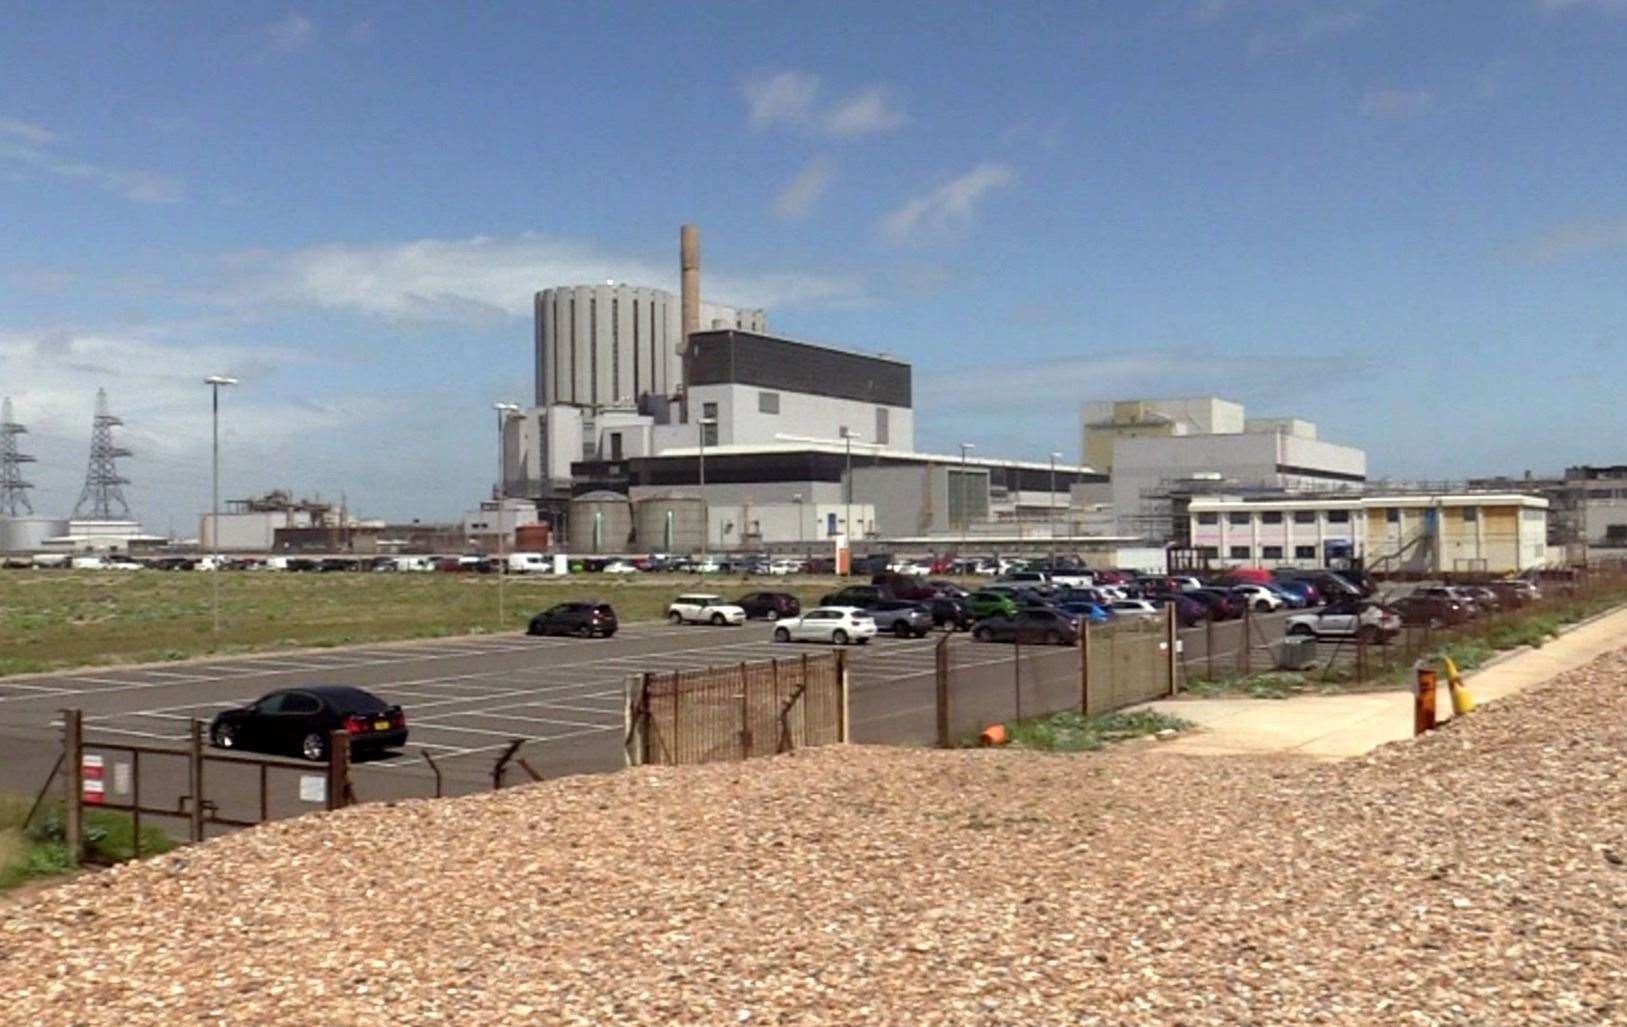 Dungeness B is being decommissioned with no future nuclear power station planned for the site